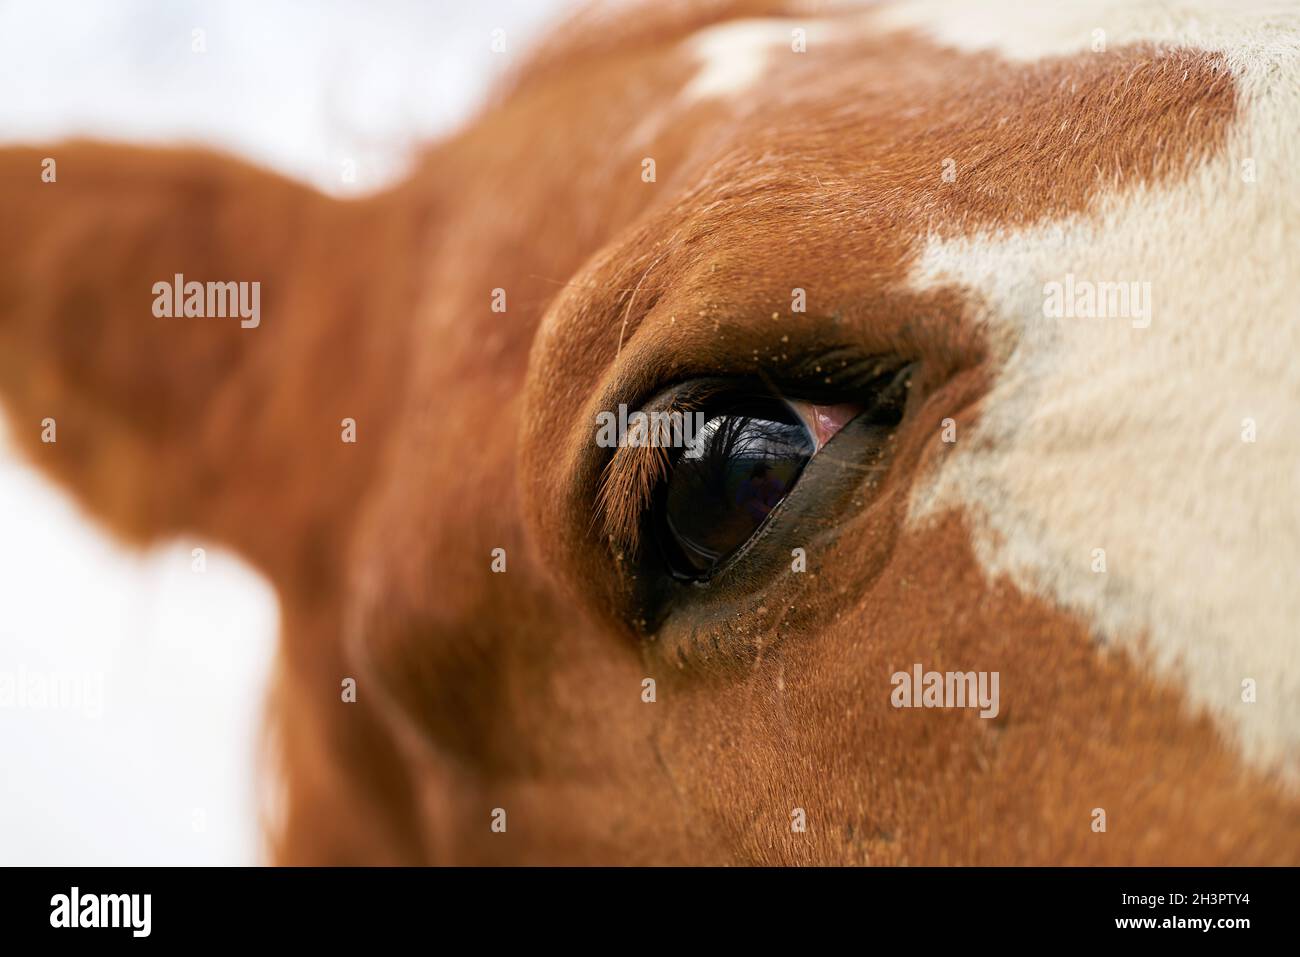 Close up of the eye of a single horse on a farm Stock Photo